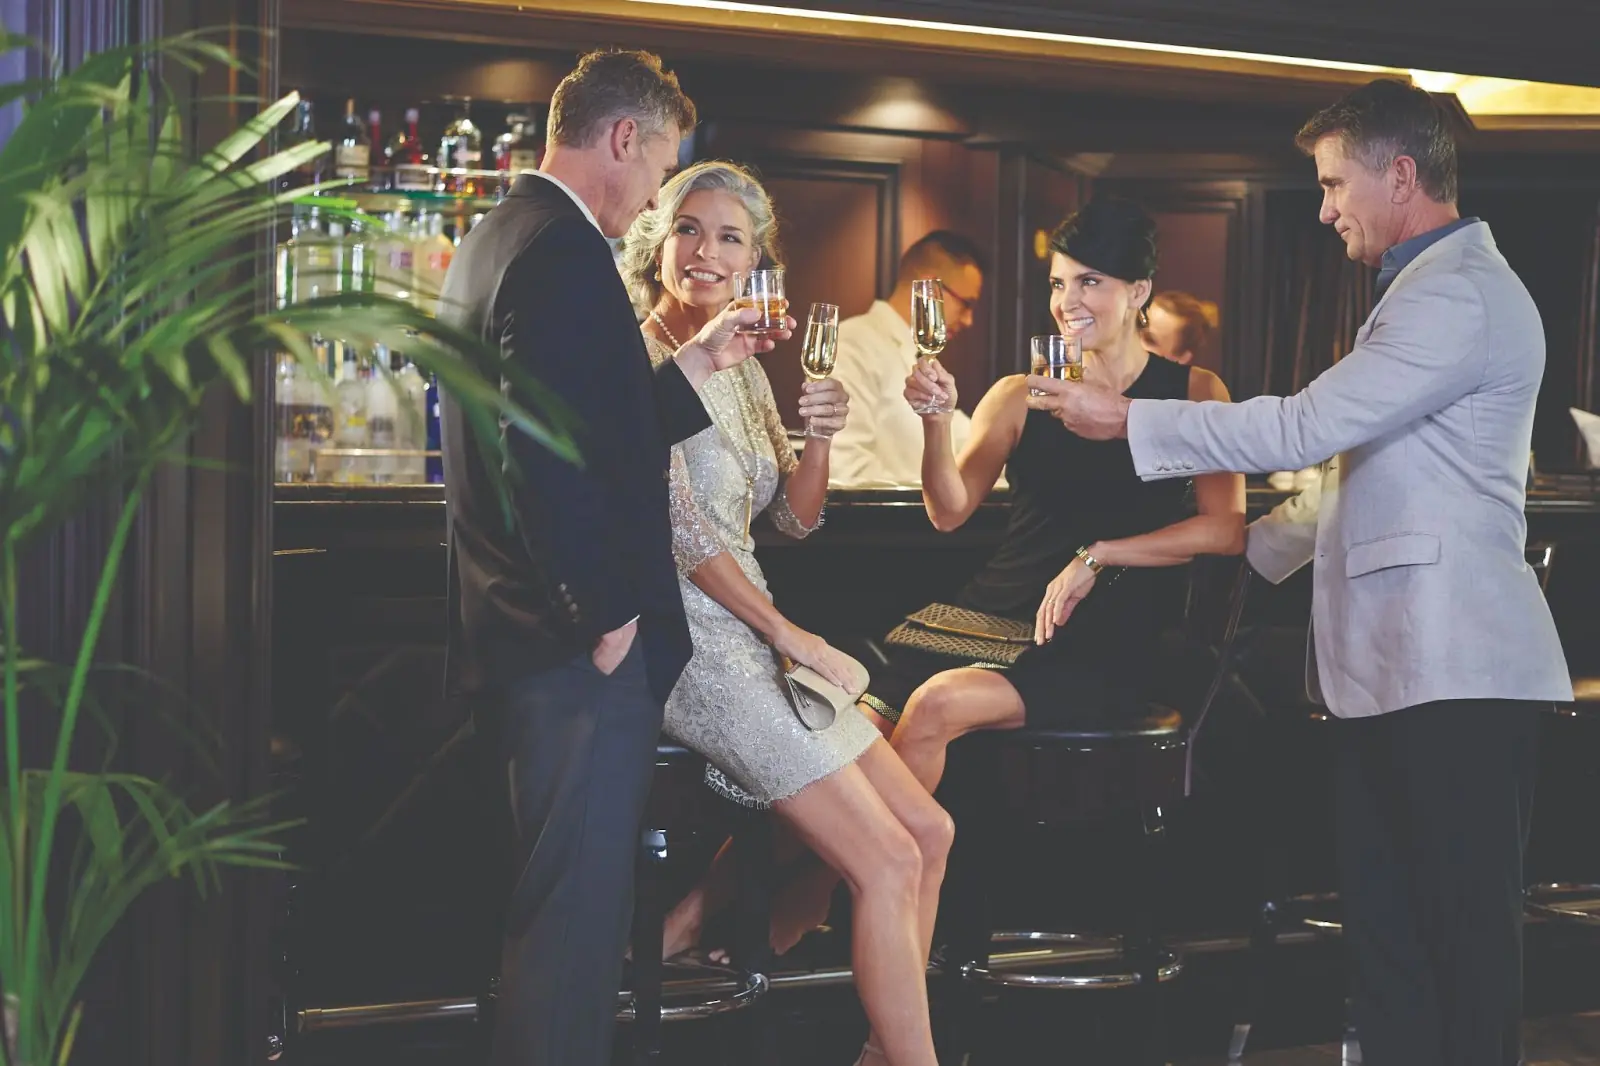 Guests at a bar onboard Oceania Cruises